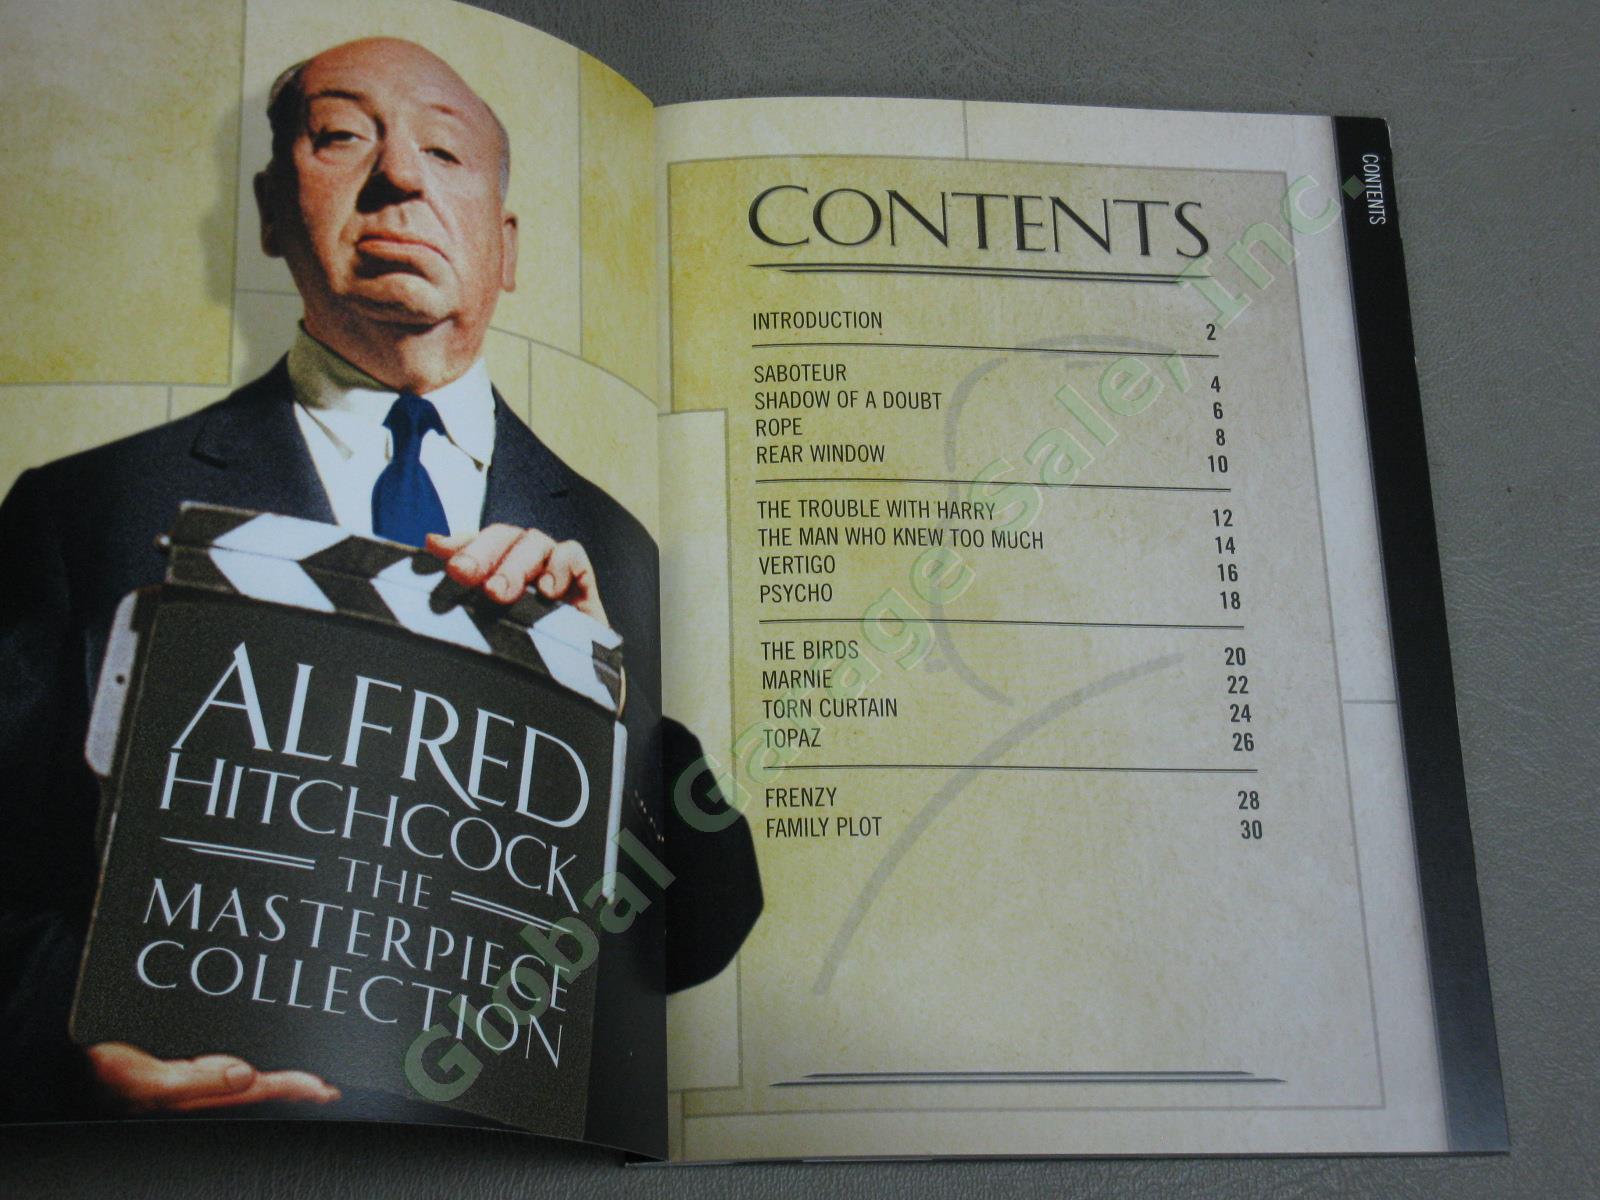 HUGE Alfred Hitchcock DVD Lot Masterpiece Collection Presents Seasons 1-5 Movies 2